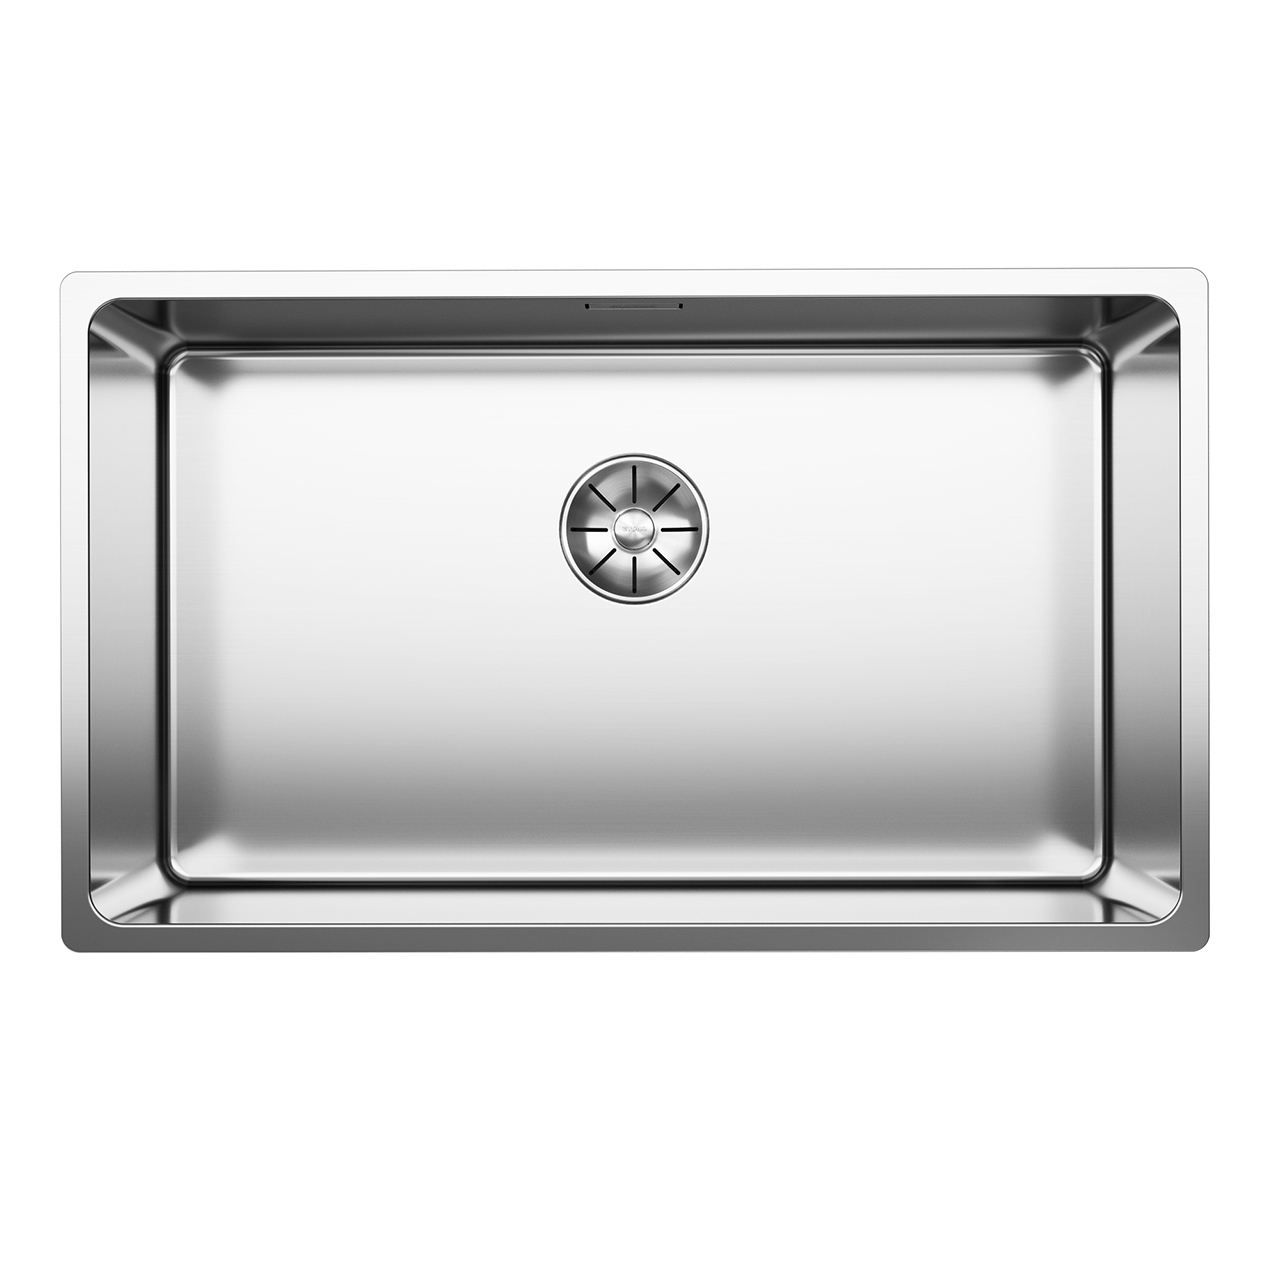 Andano 700 Kitchen Sink by Blanco